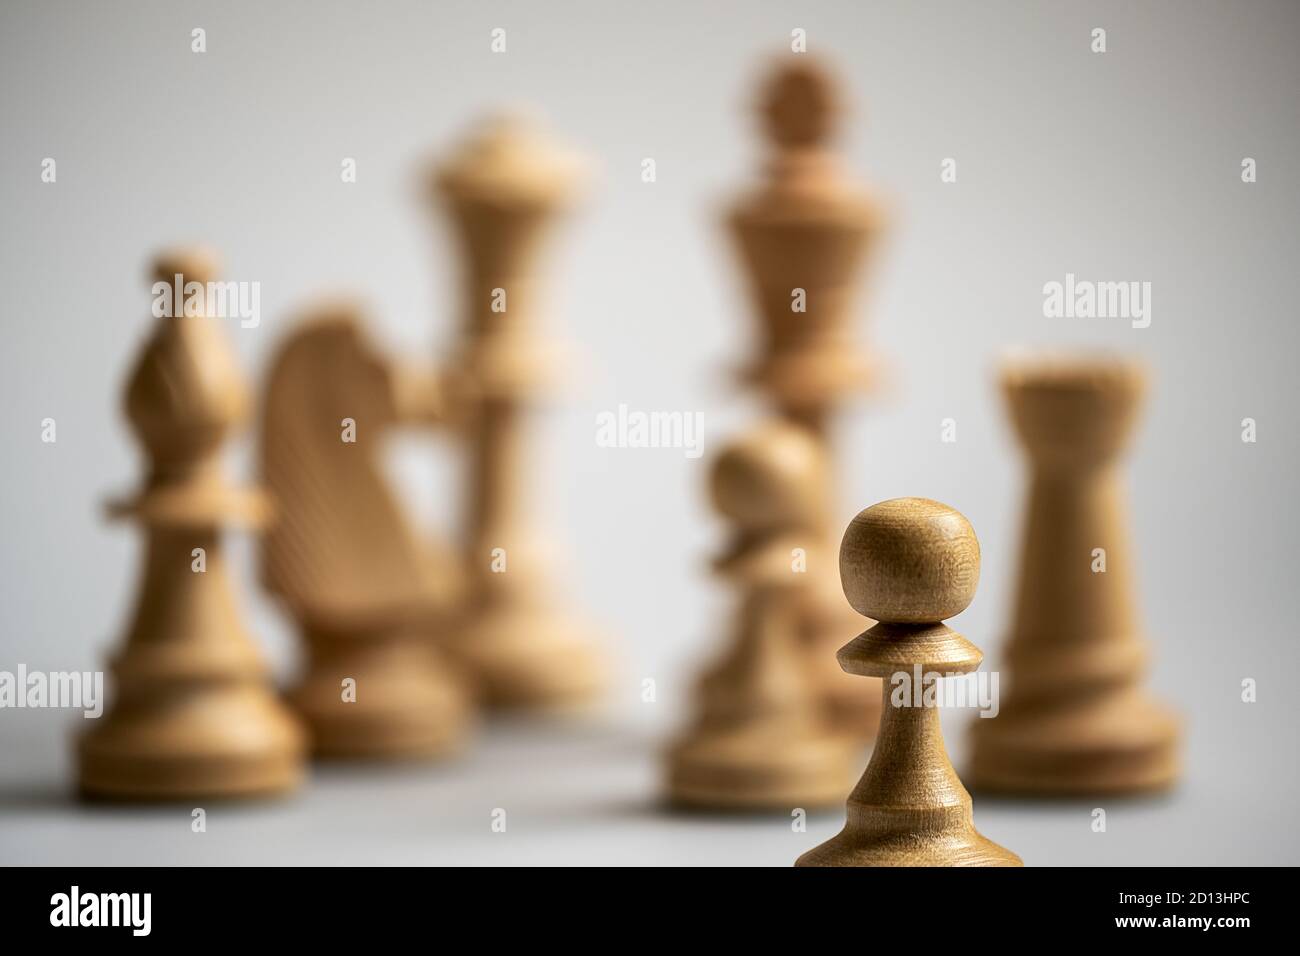 different chess pieces out of focus in the background, only one pawn in focus in the foreground Stock Photo